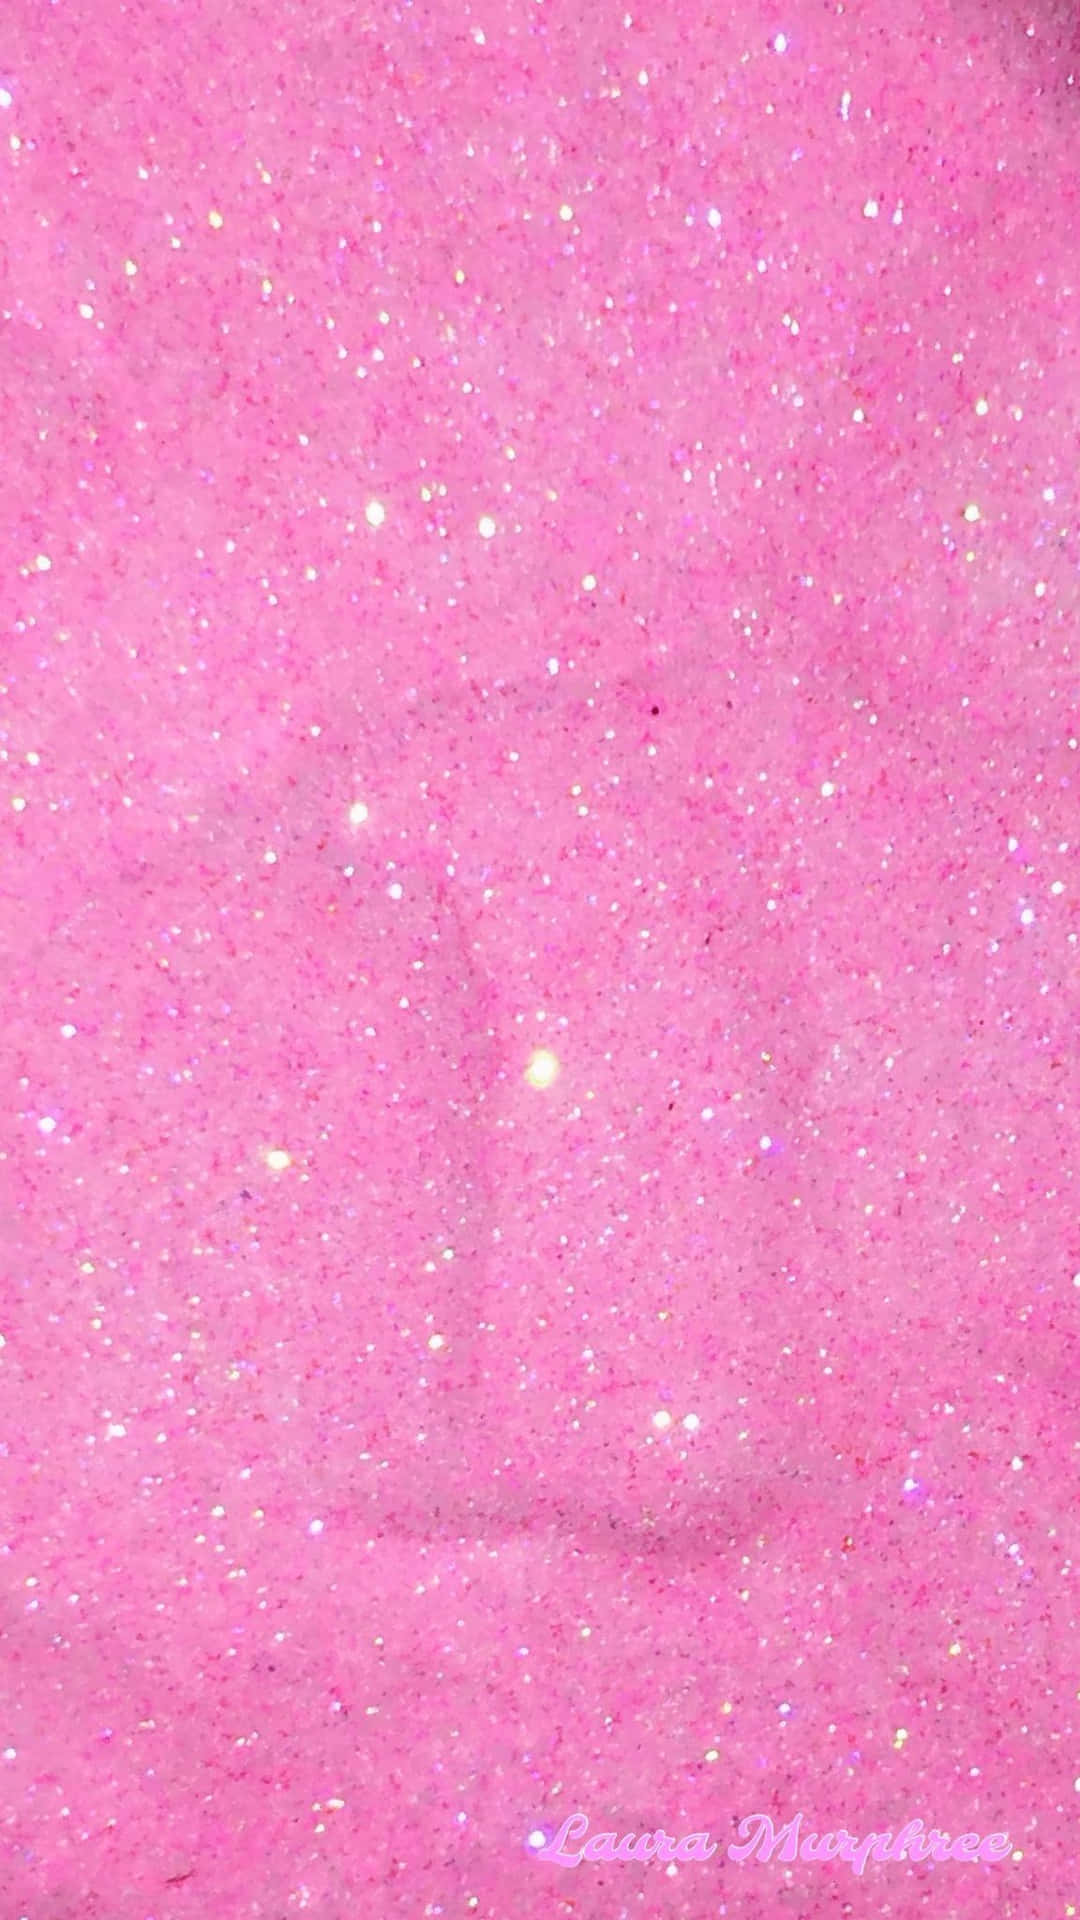 Ethereal Sparkles Background